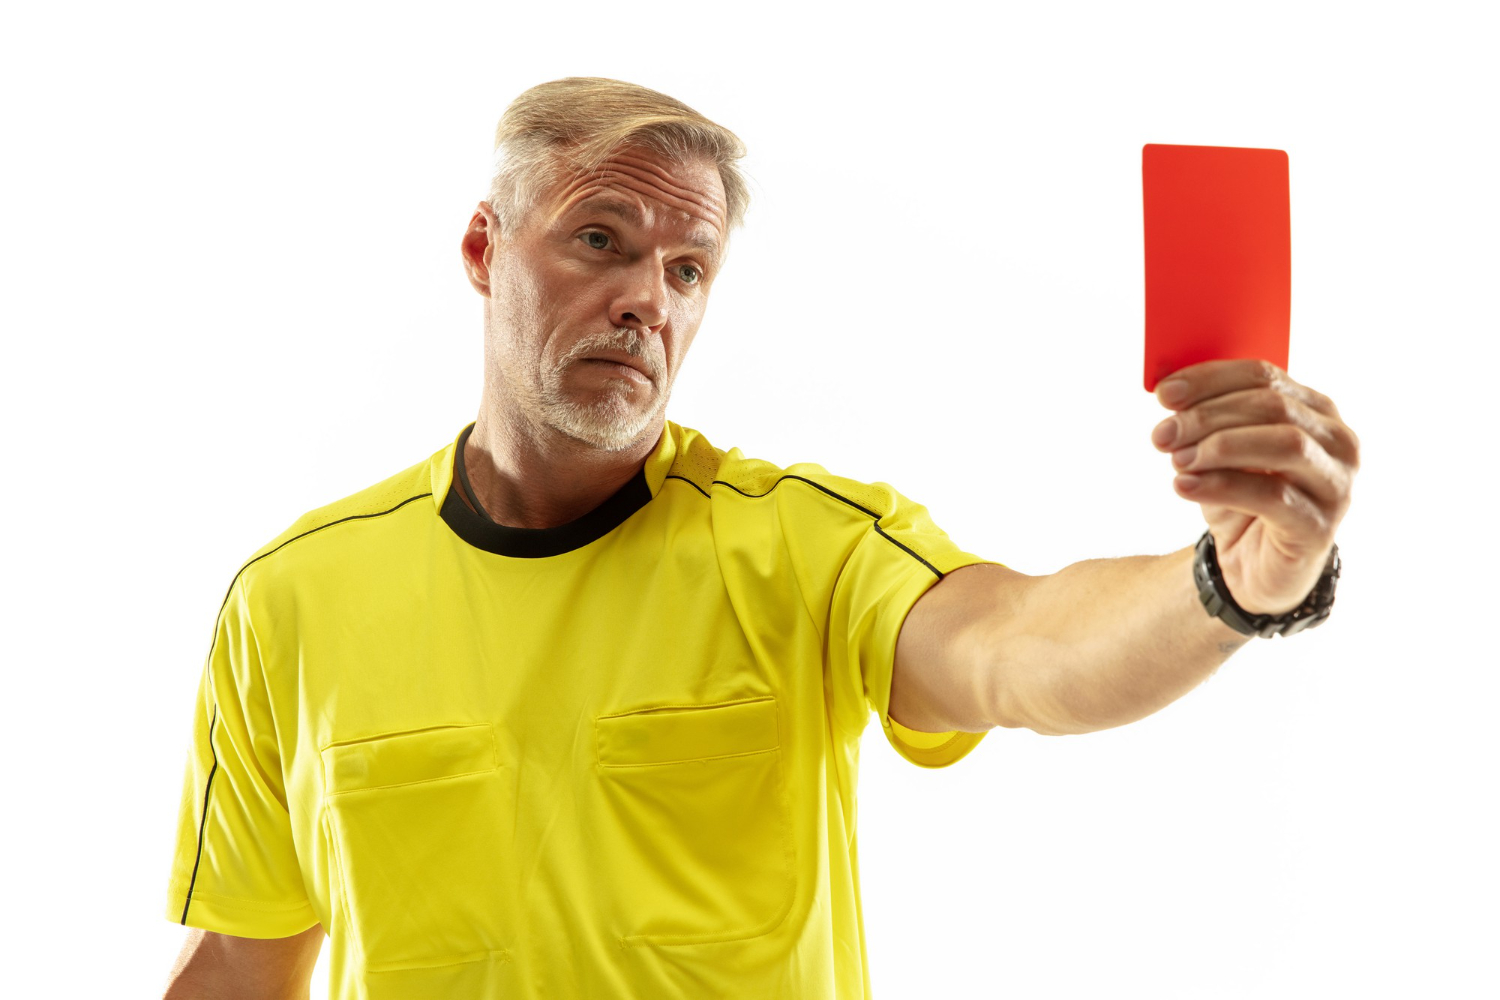 referee-showing-red-card-displeased-football-soccer-player